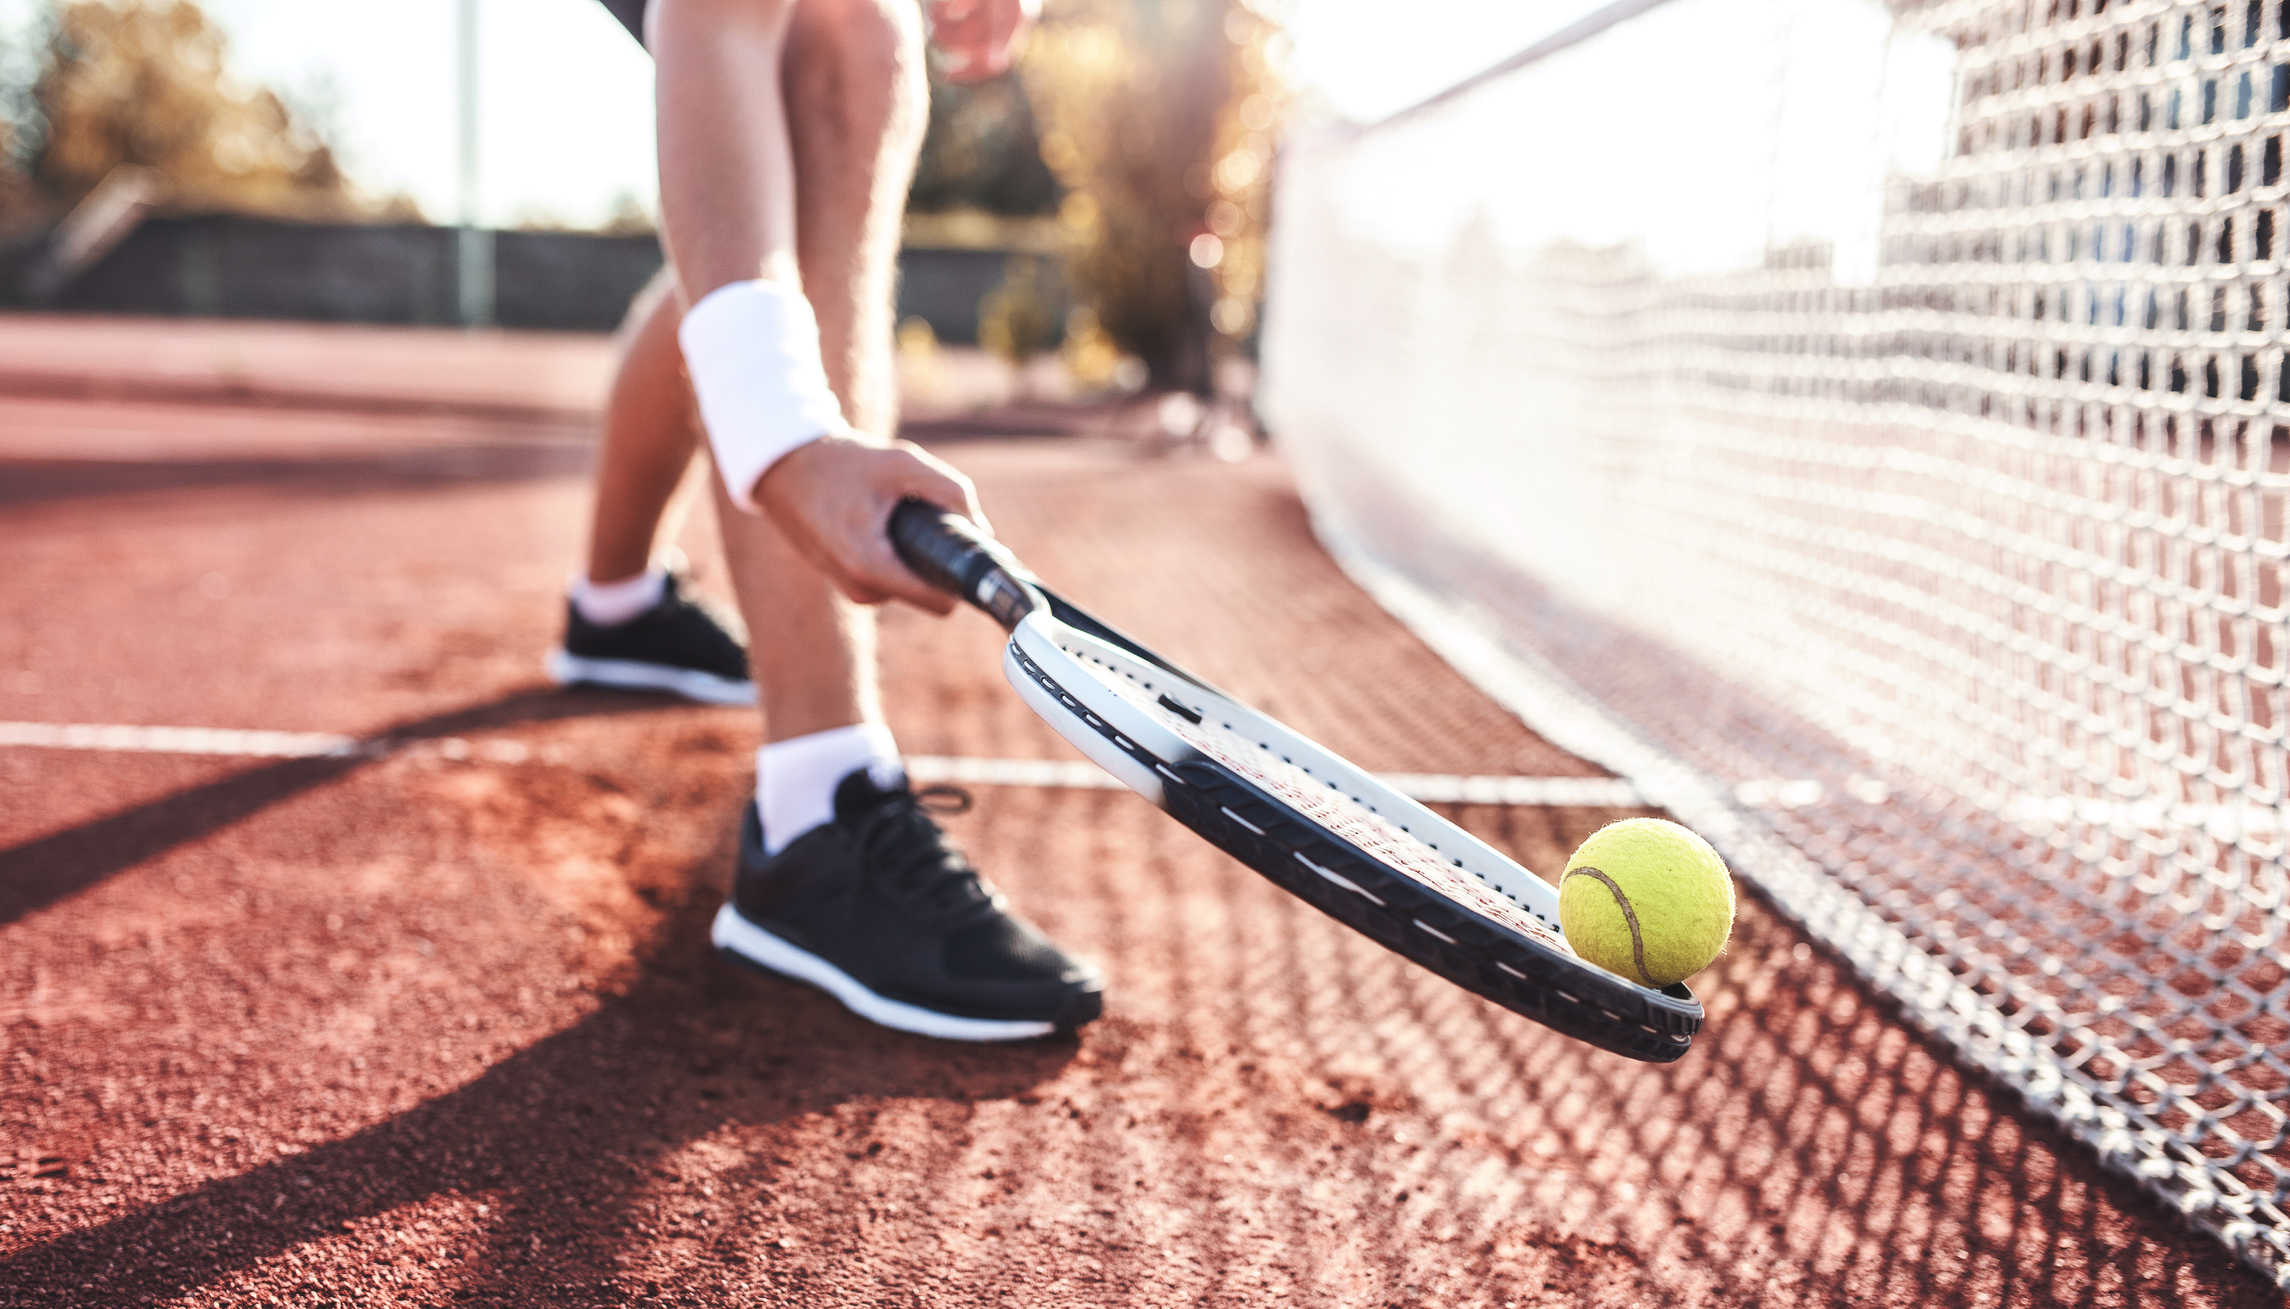 Learn to play tennis. Image credit: Bobex-73/iStock